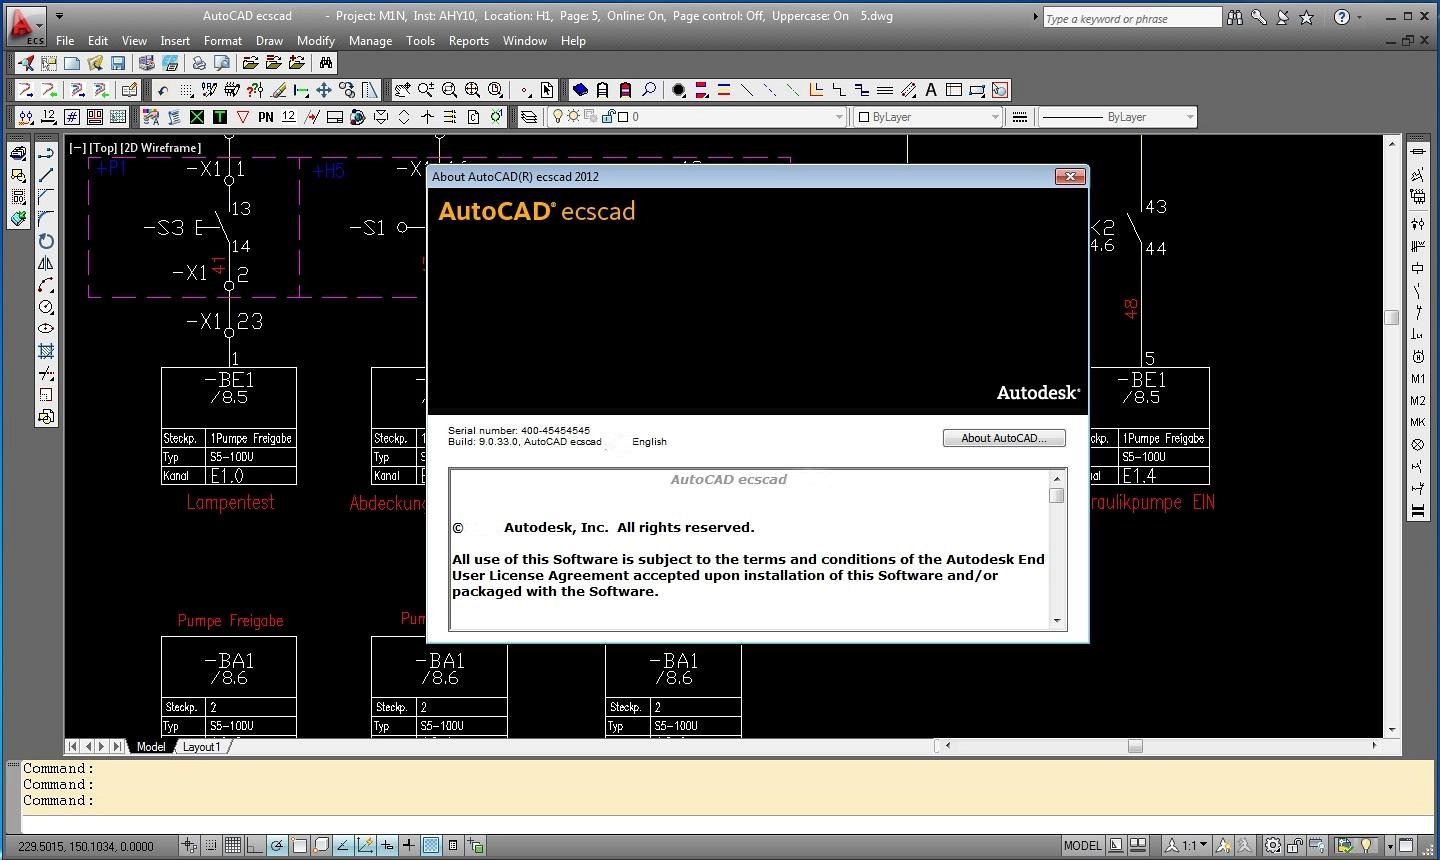 Working with Autodesk AutoCAD ecscad 2012 full